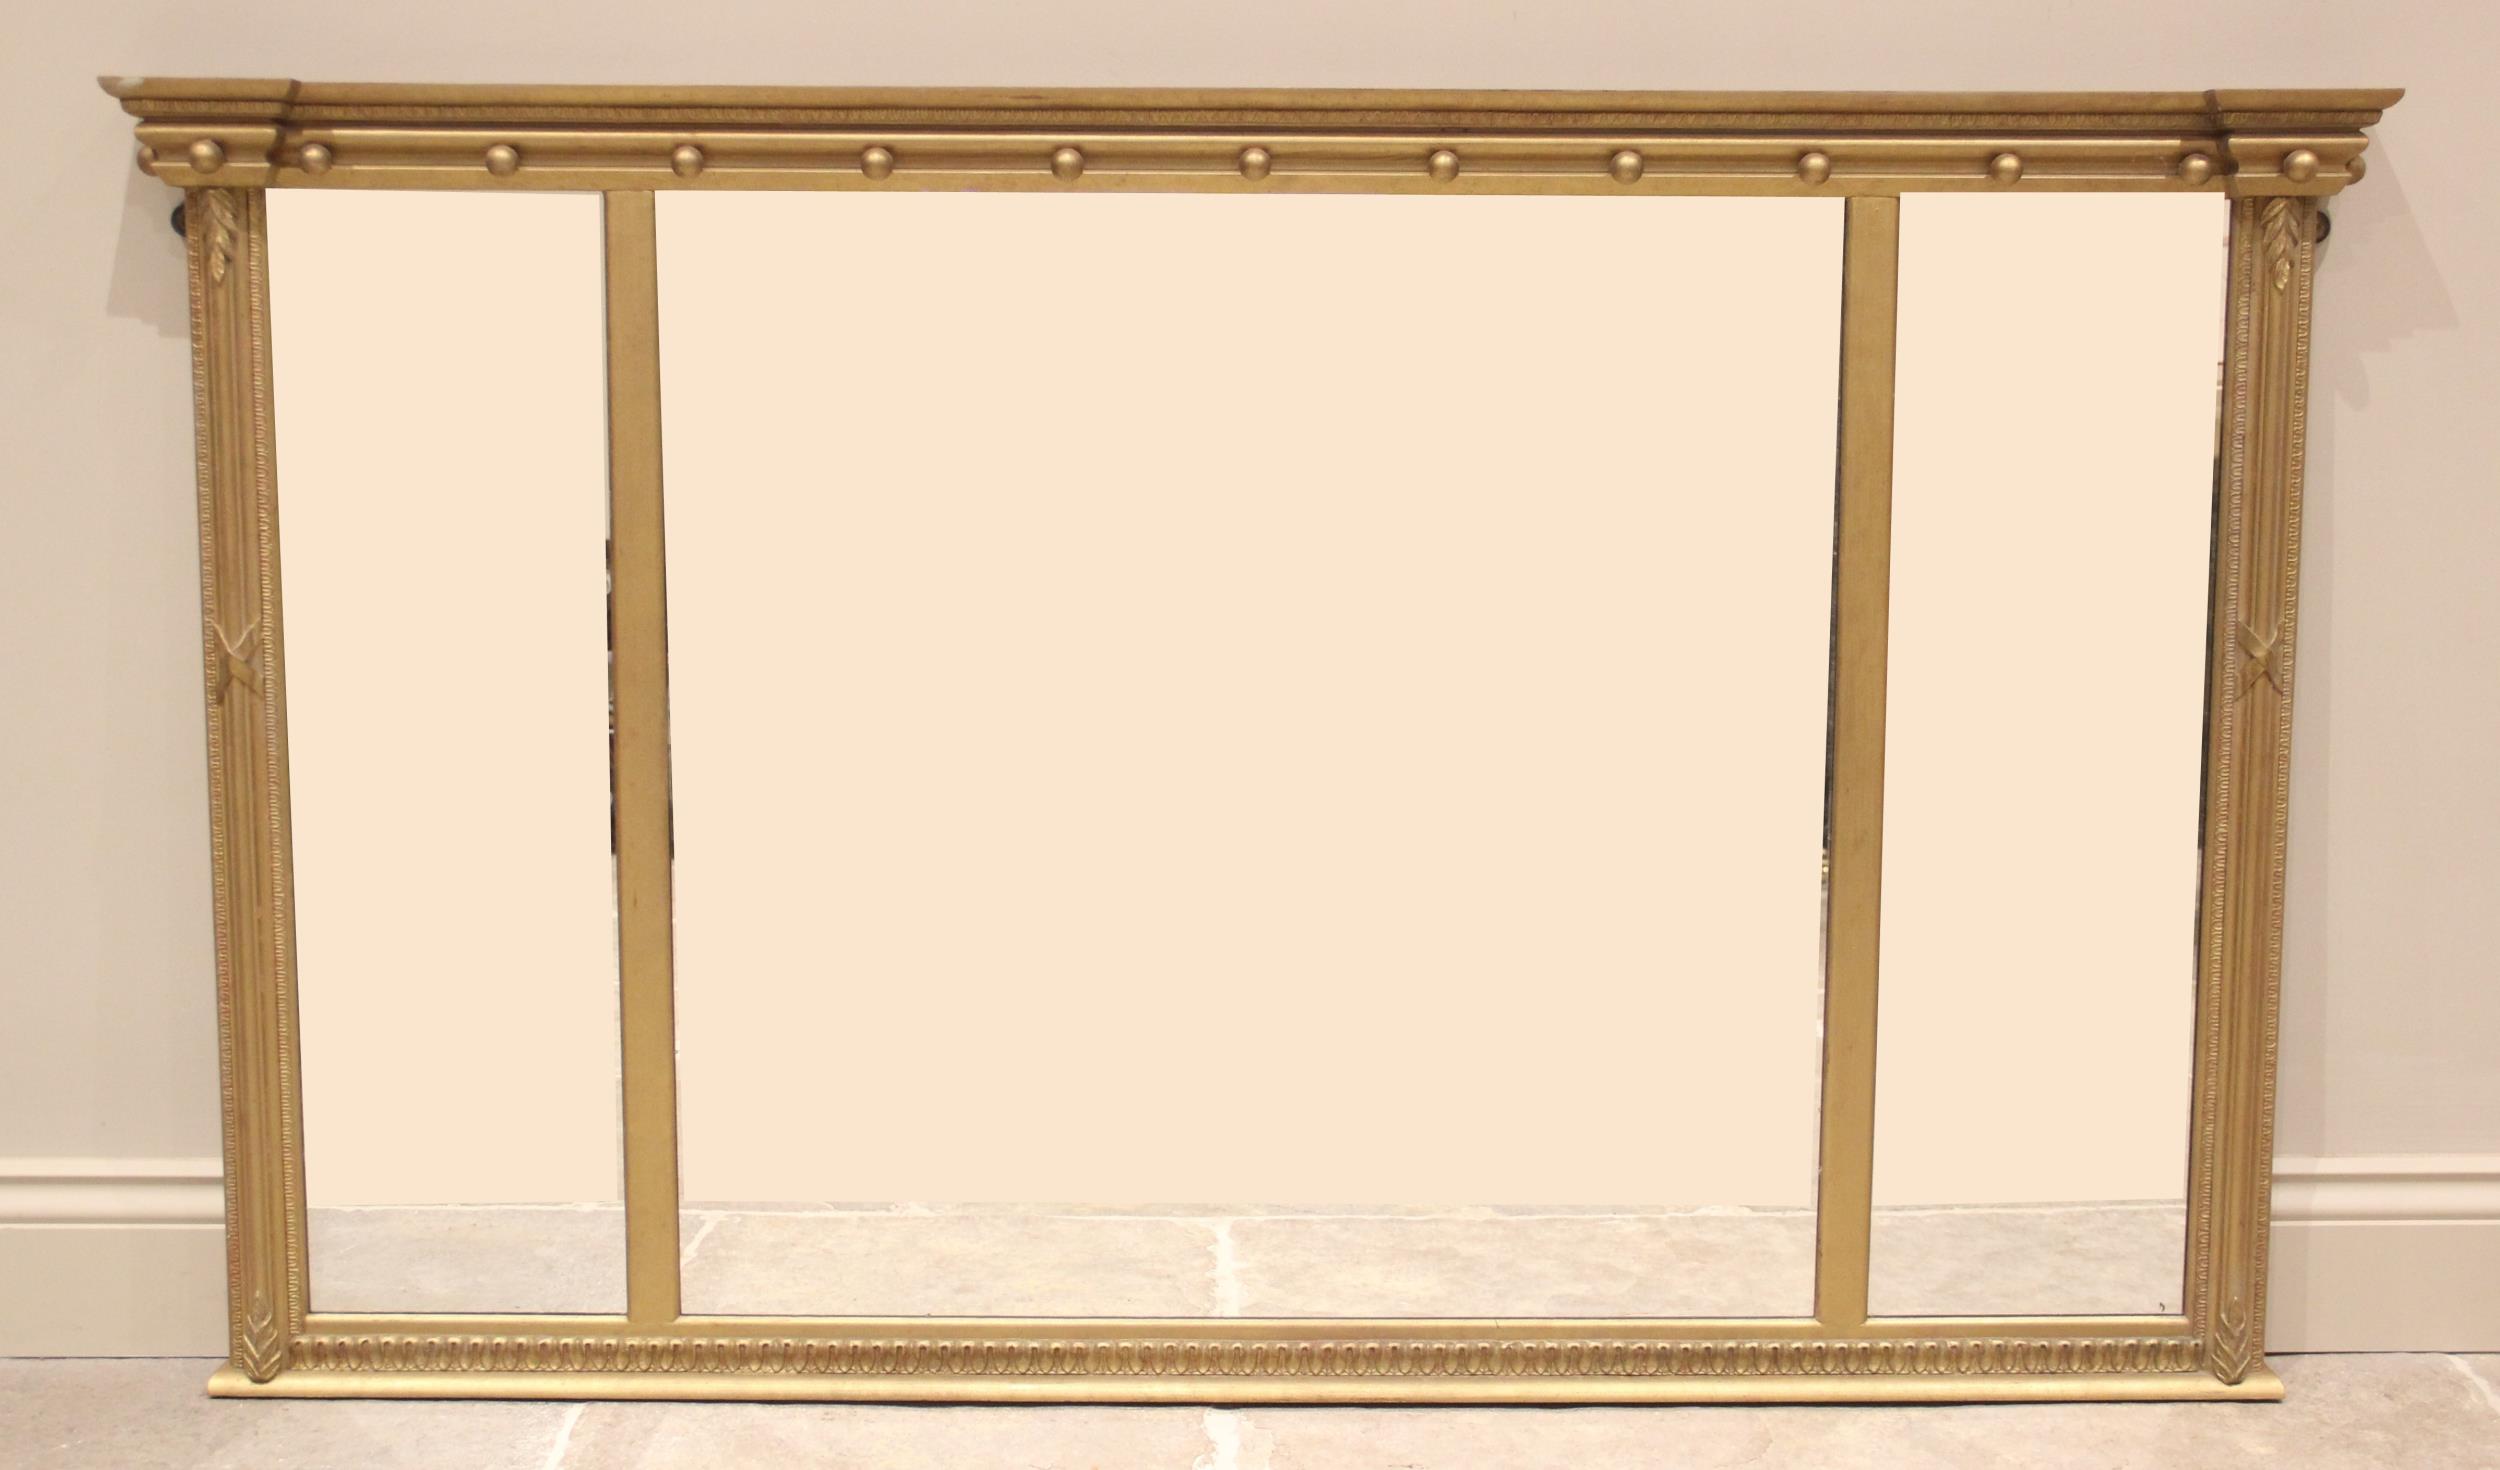 A Regency style gilt wood and gesso triptych over mantel wall mirror, 20th century, the moulded